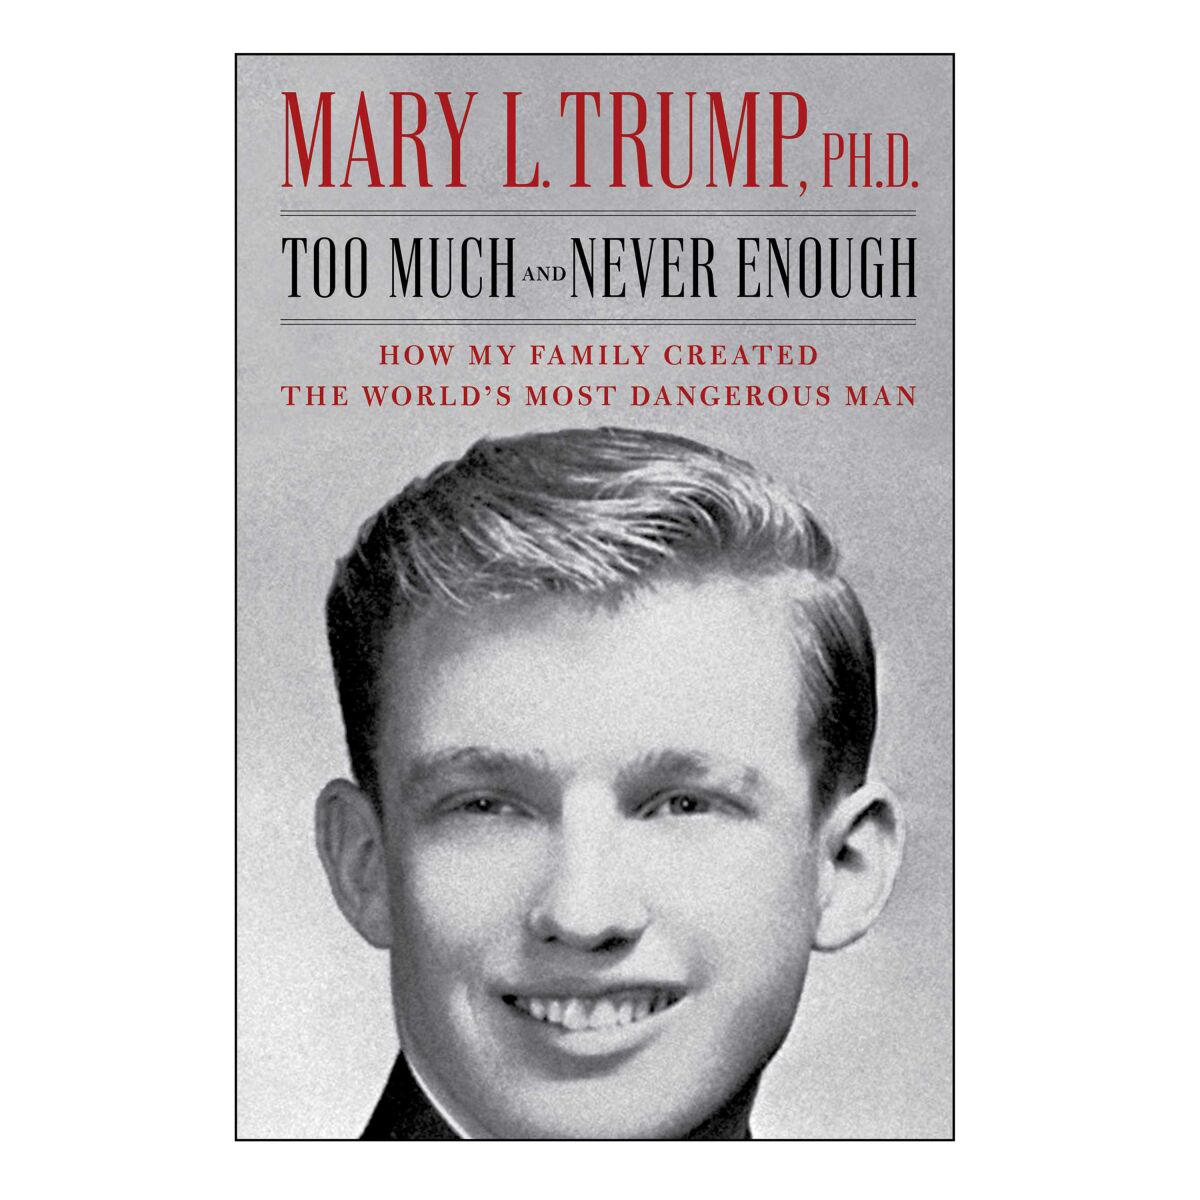 HOLIDAY GIFT GUIDE - Cover of the book Too Much and Never Enough by Mary L. Trump.